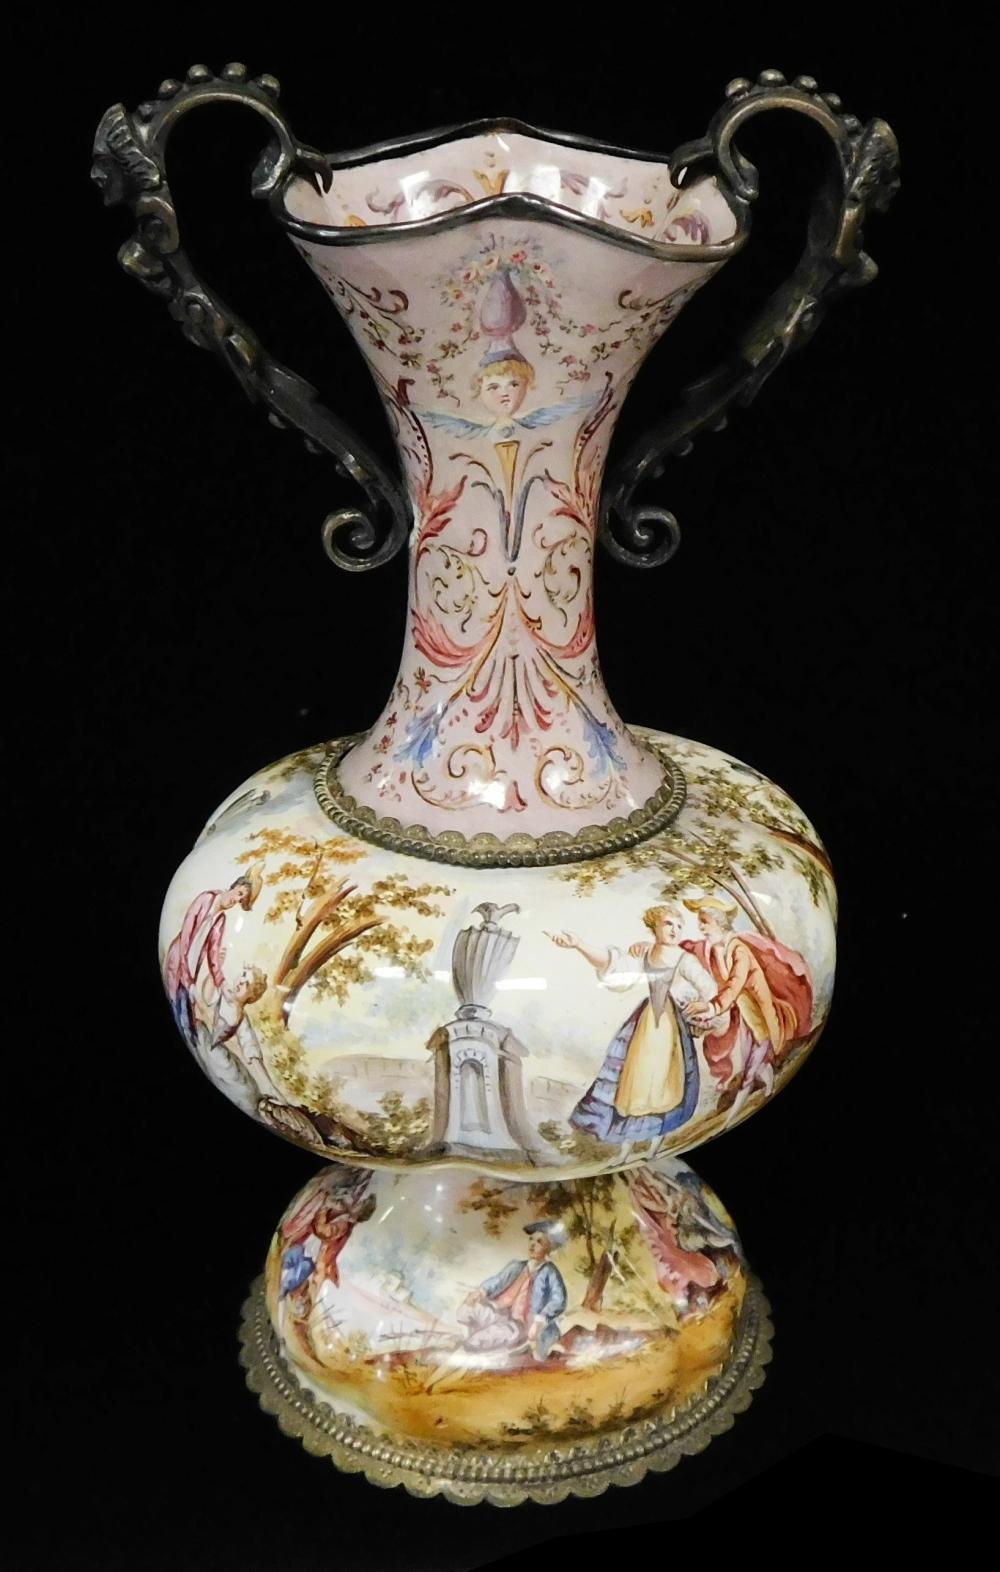 VIENNESE SILVER AND ENAMEL VASE  2e2d94